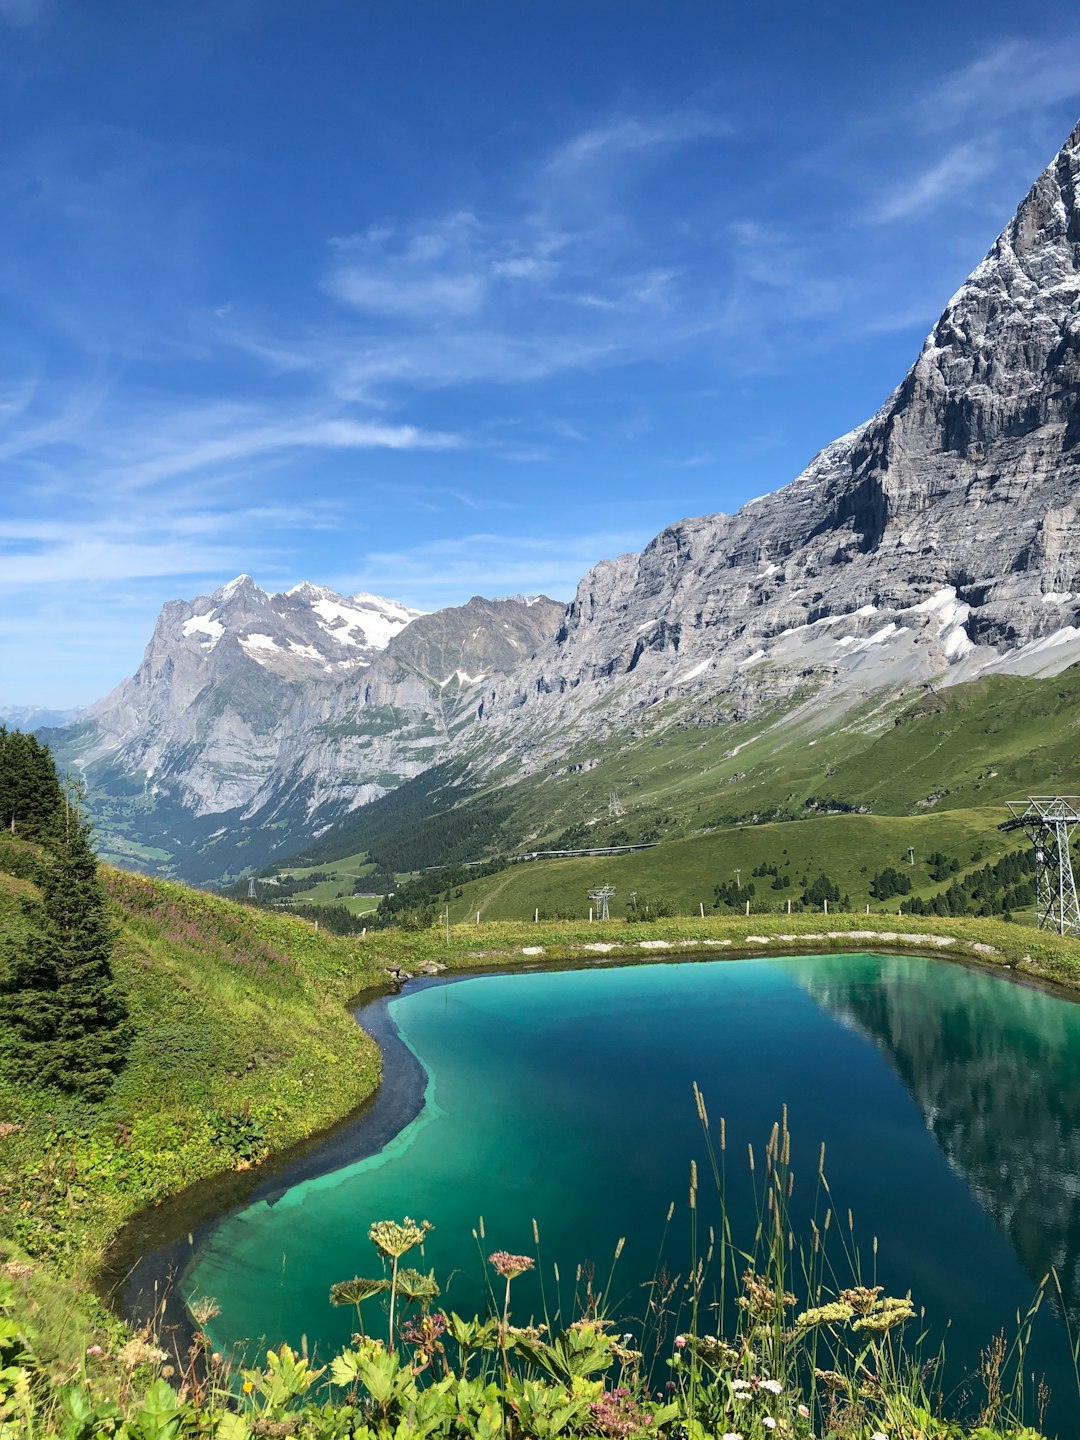 Glacial lake photo spot Grindelwald Oeschinensee